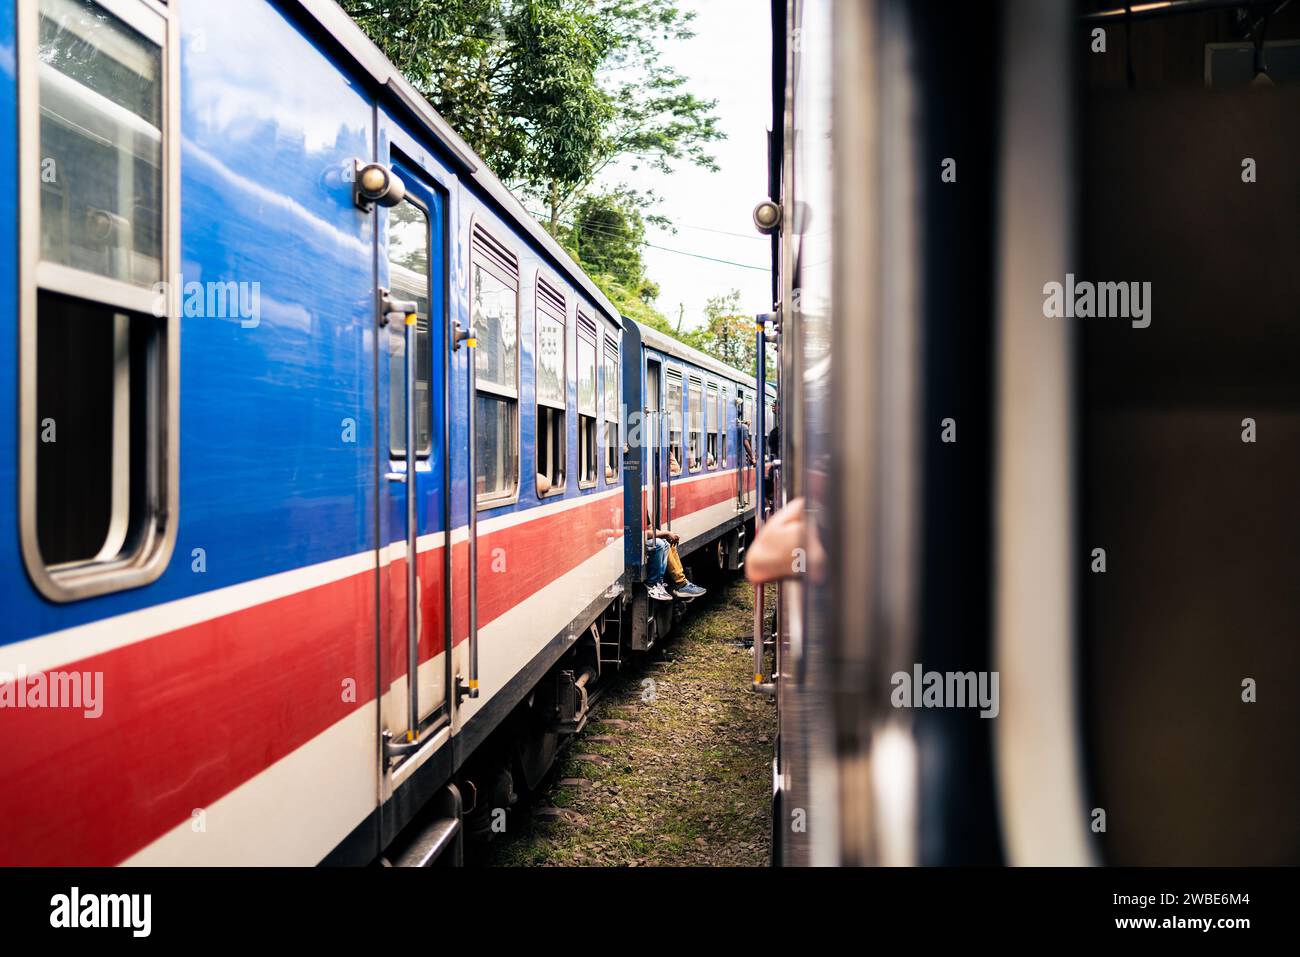 Two trains in Sri Lanka waiting at station. Railway travel and rail tourism. Old colorful blue and red heritage coach. Railroad in Ceylon. Stock Photo